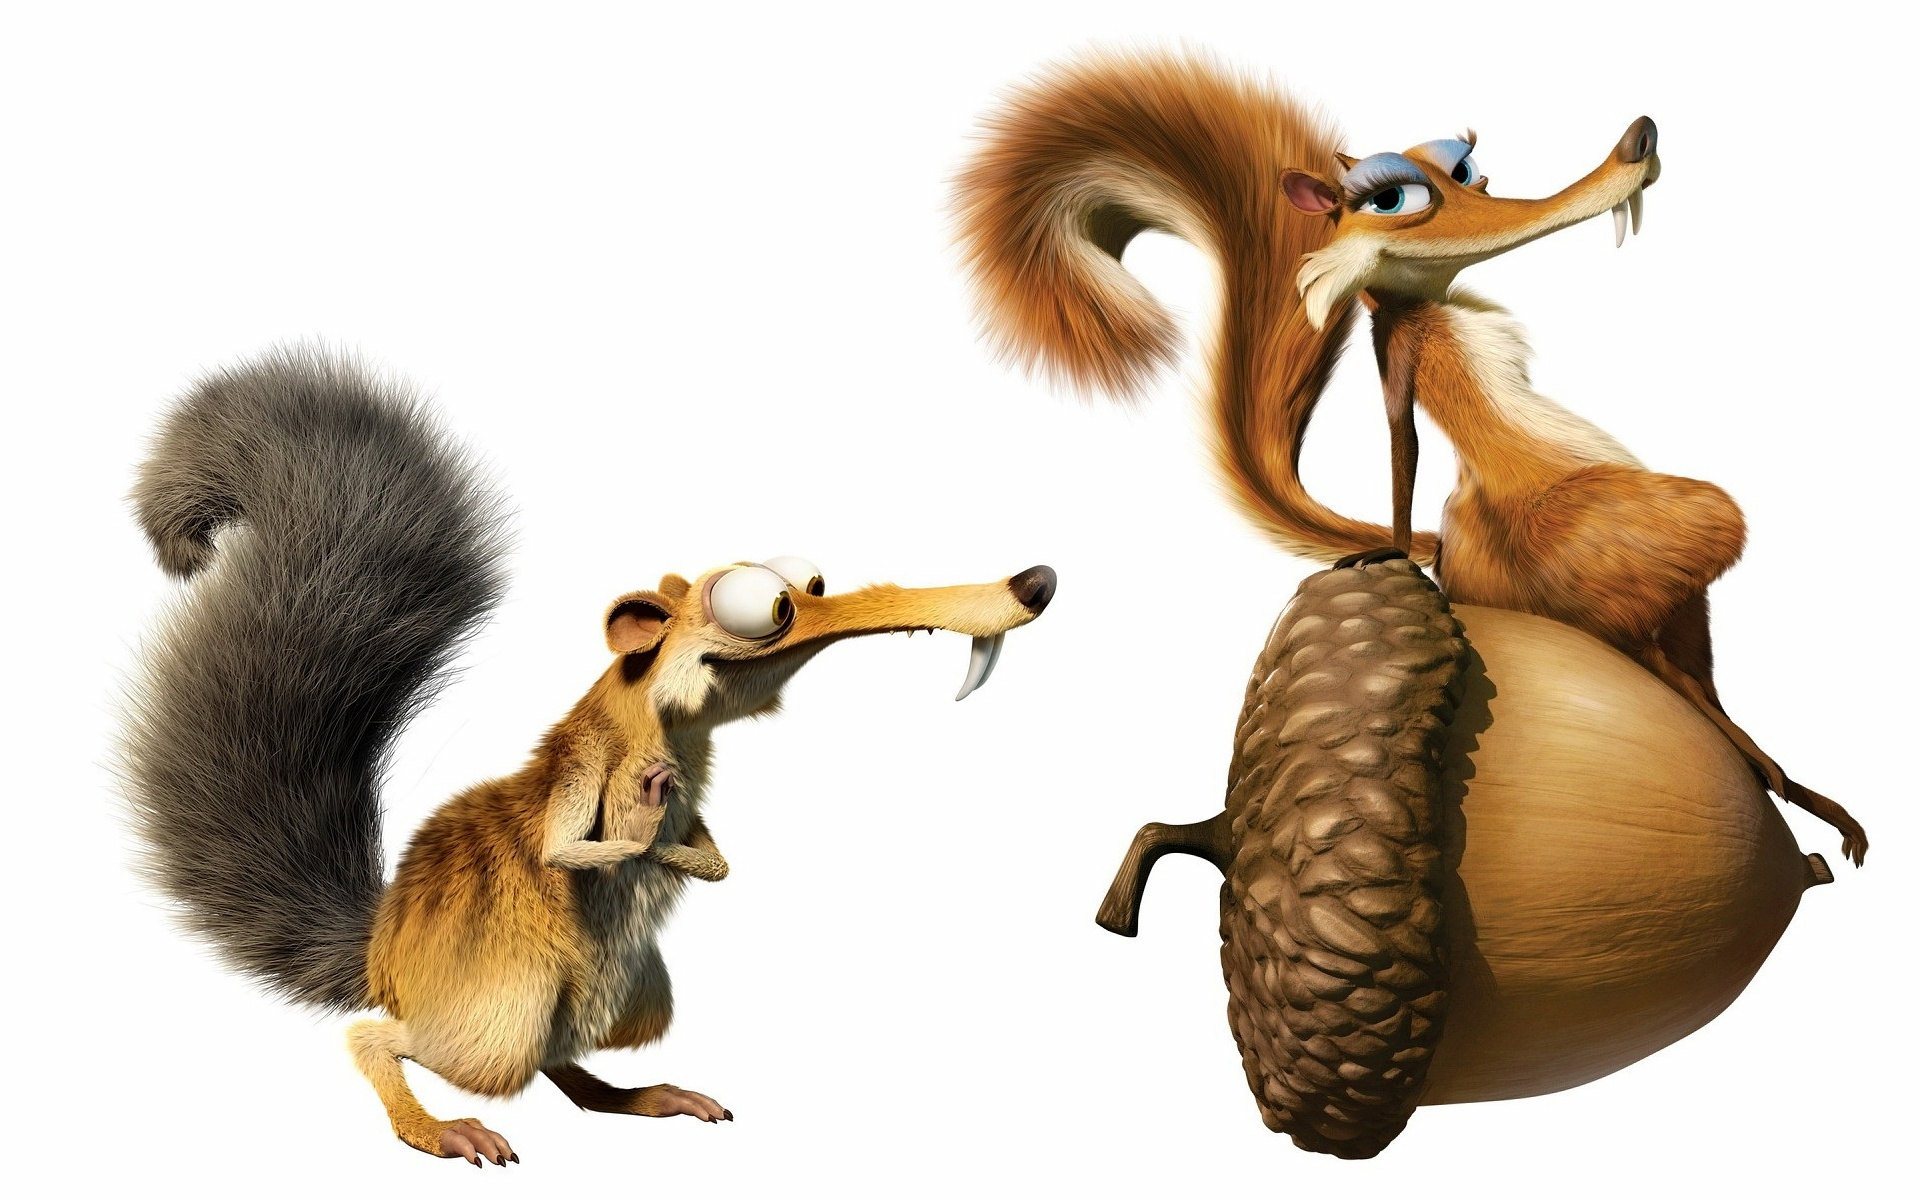 ice age movie wallpaper background, wallpapers